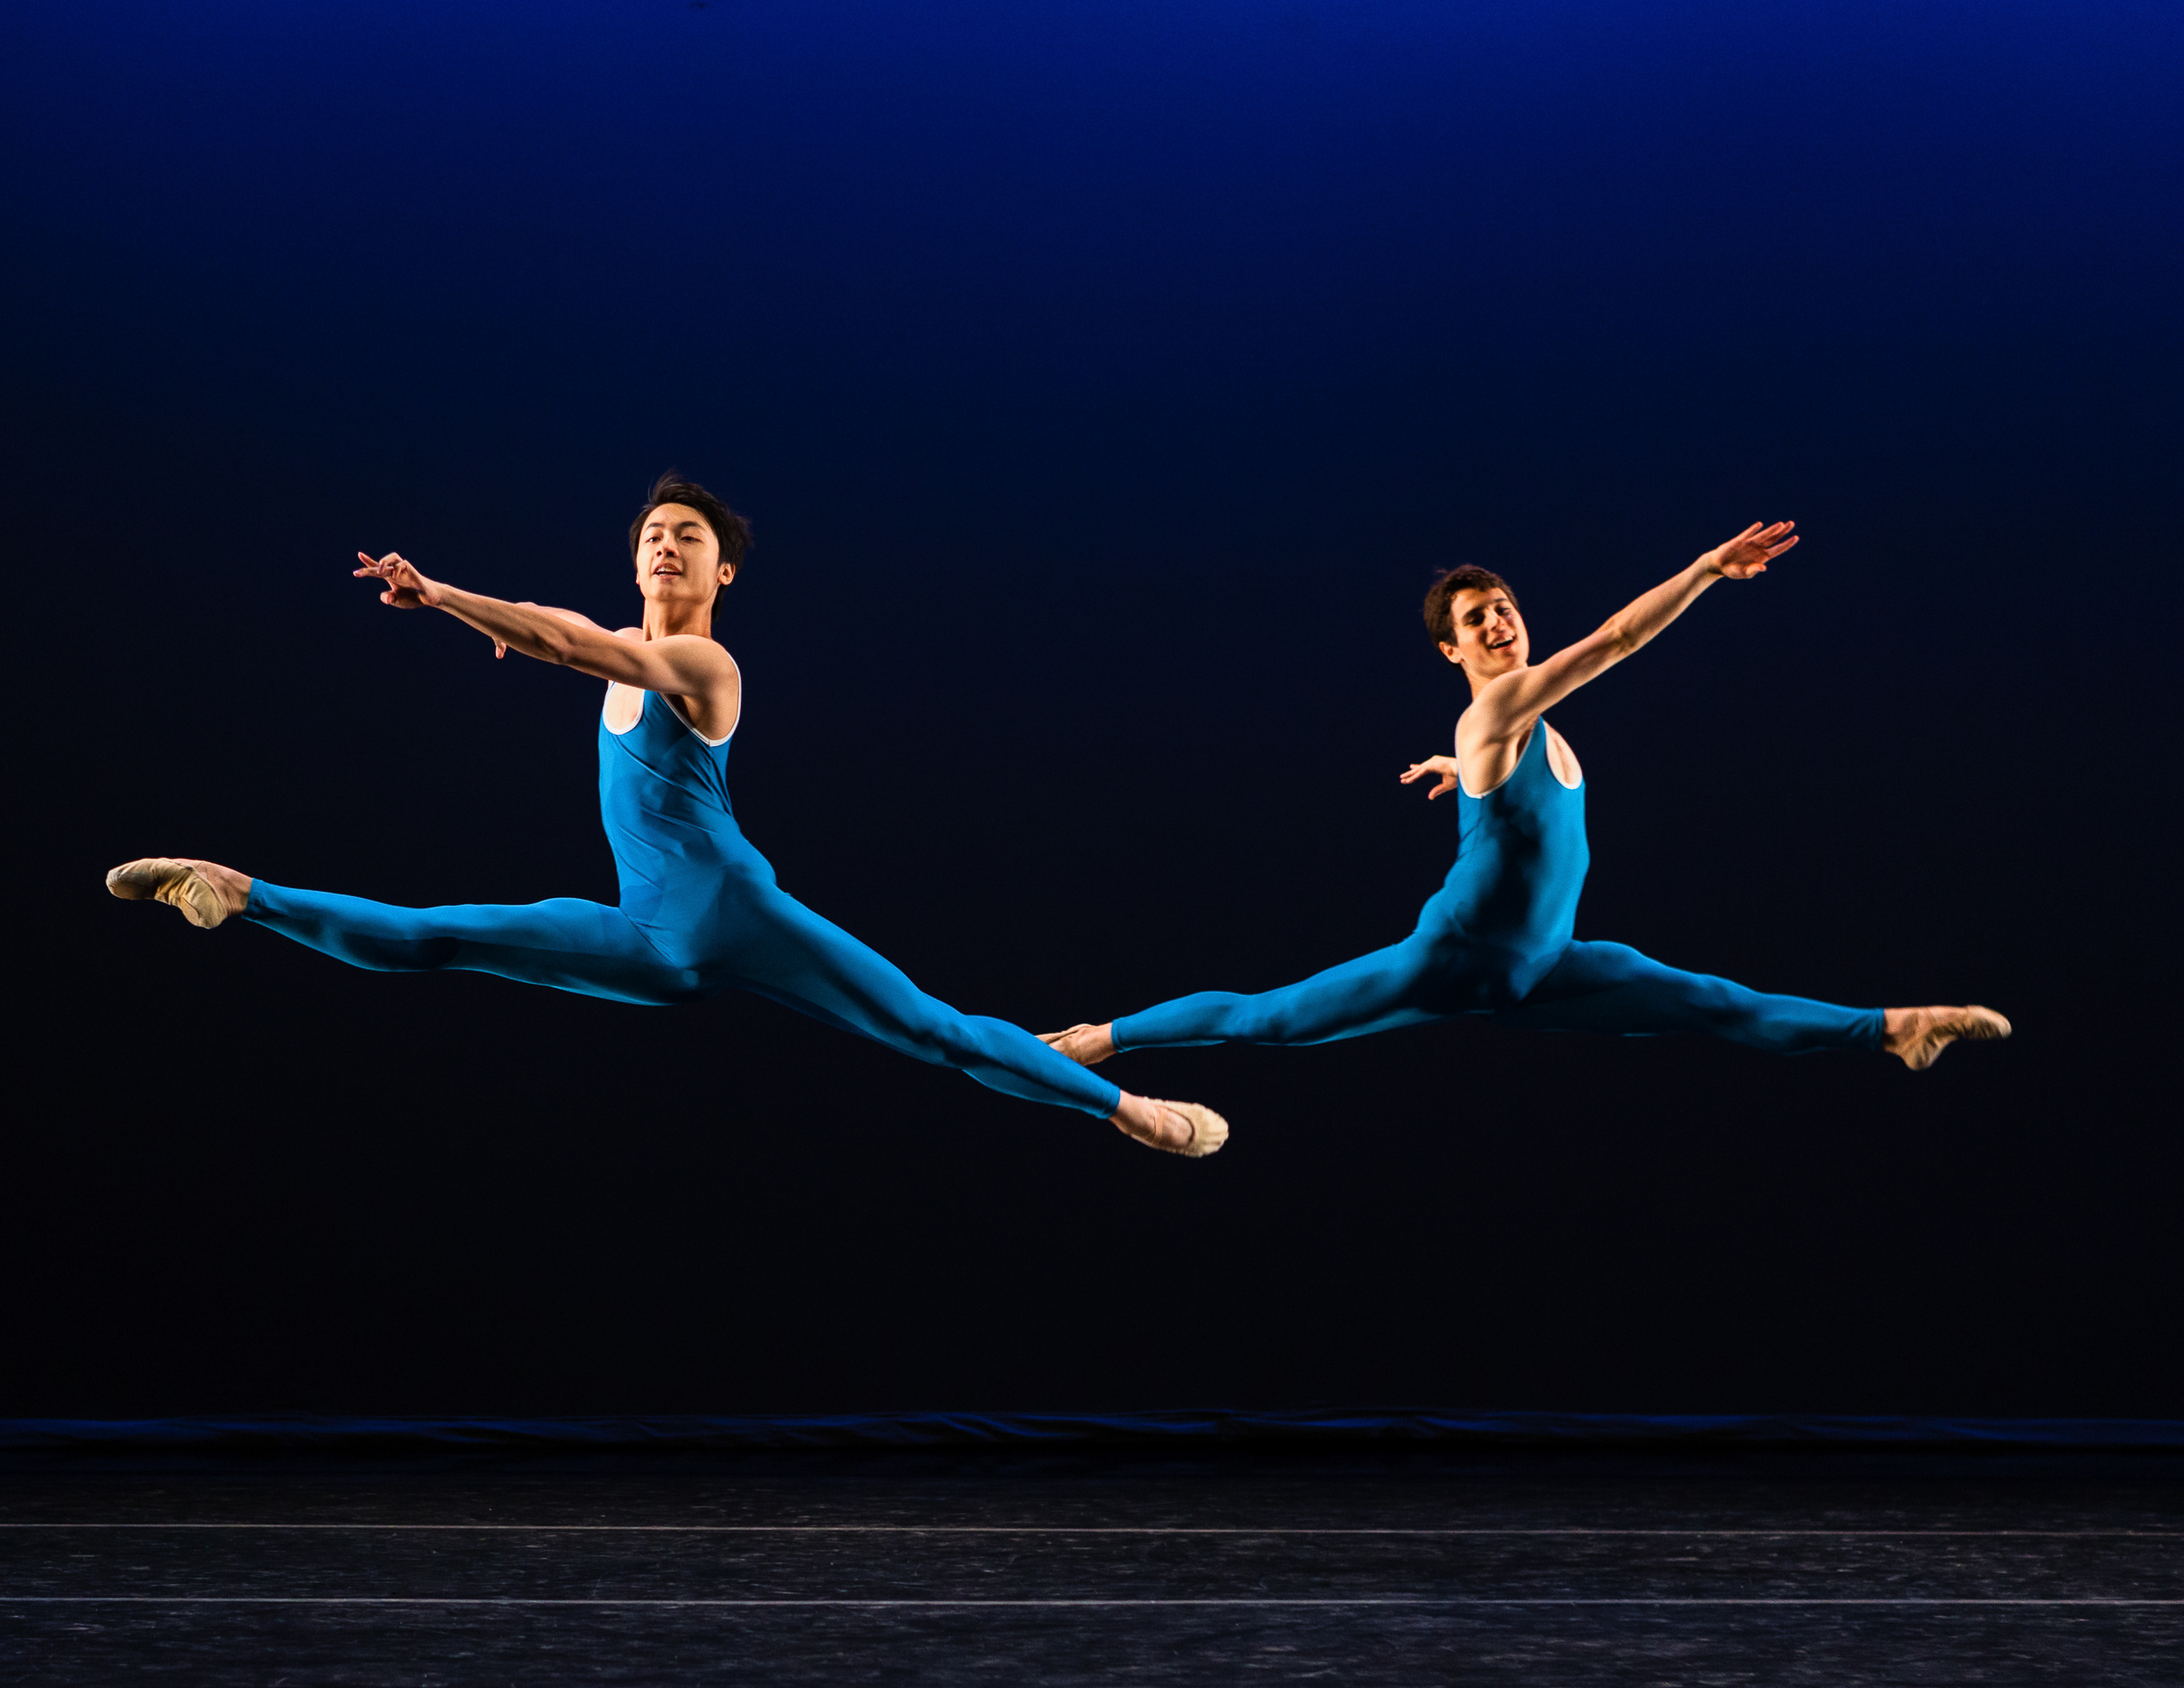   April-England  (world premiere), choreographed by Michael Corder, and performed by students of the Ballet Program at The School at Jacob’s Pillow. 